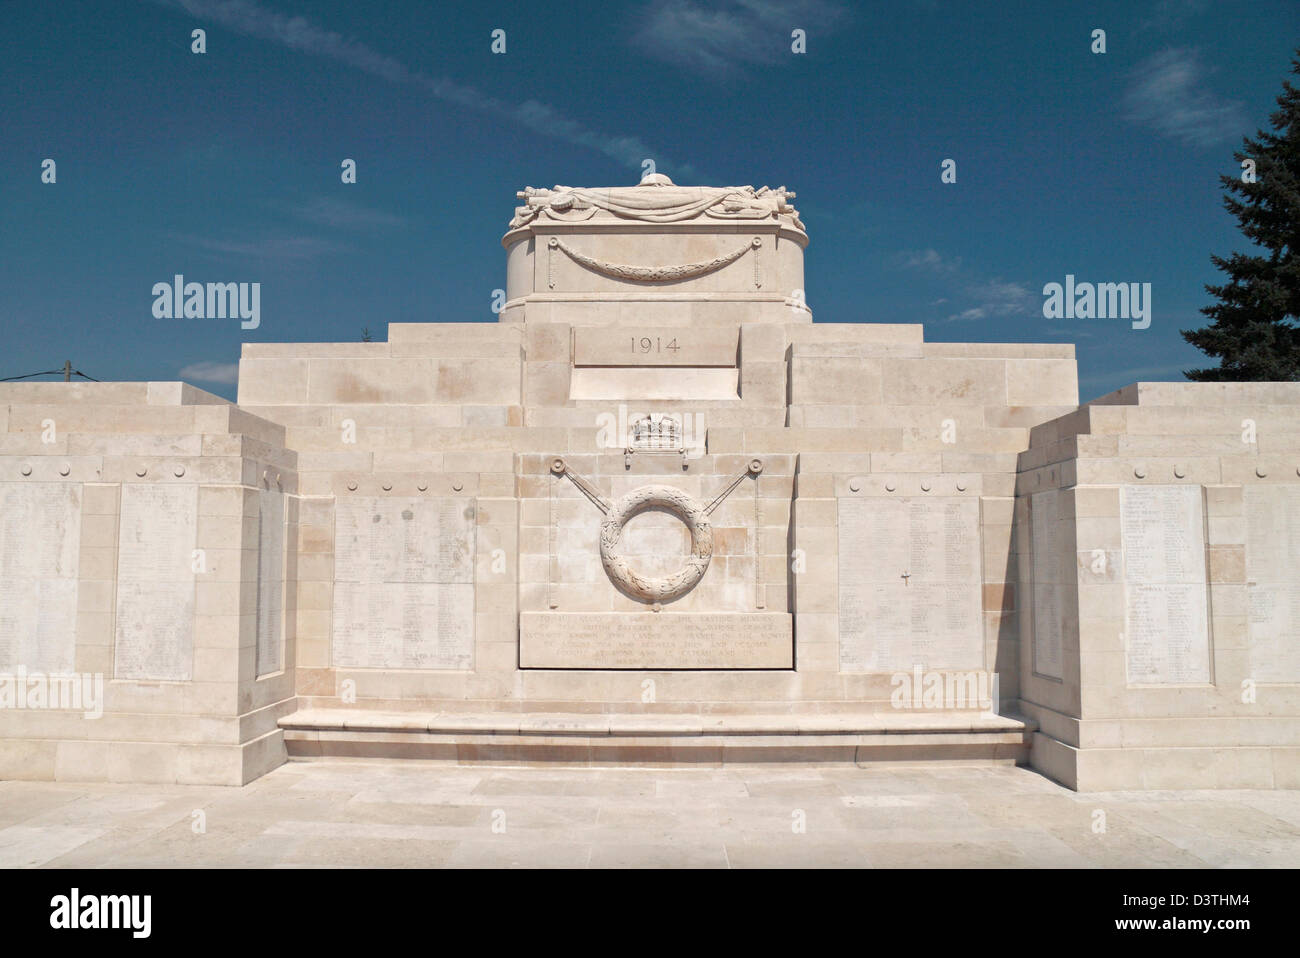 The stunningly beautiful Commonwealth Memorial to the Missing in La Ferte-sous-Jouarre, Seine-et-Marne, Aisne, France. Stock Photo